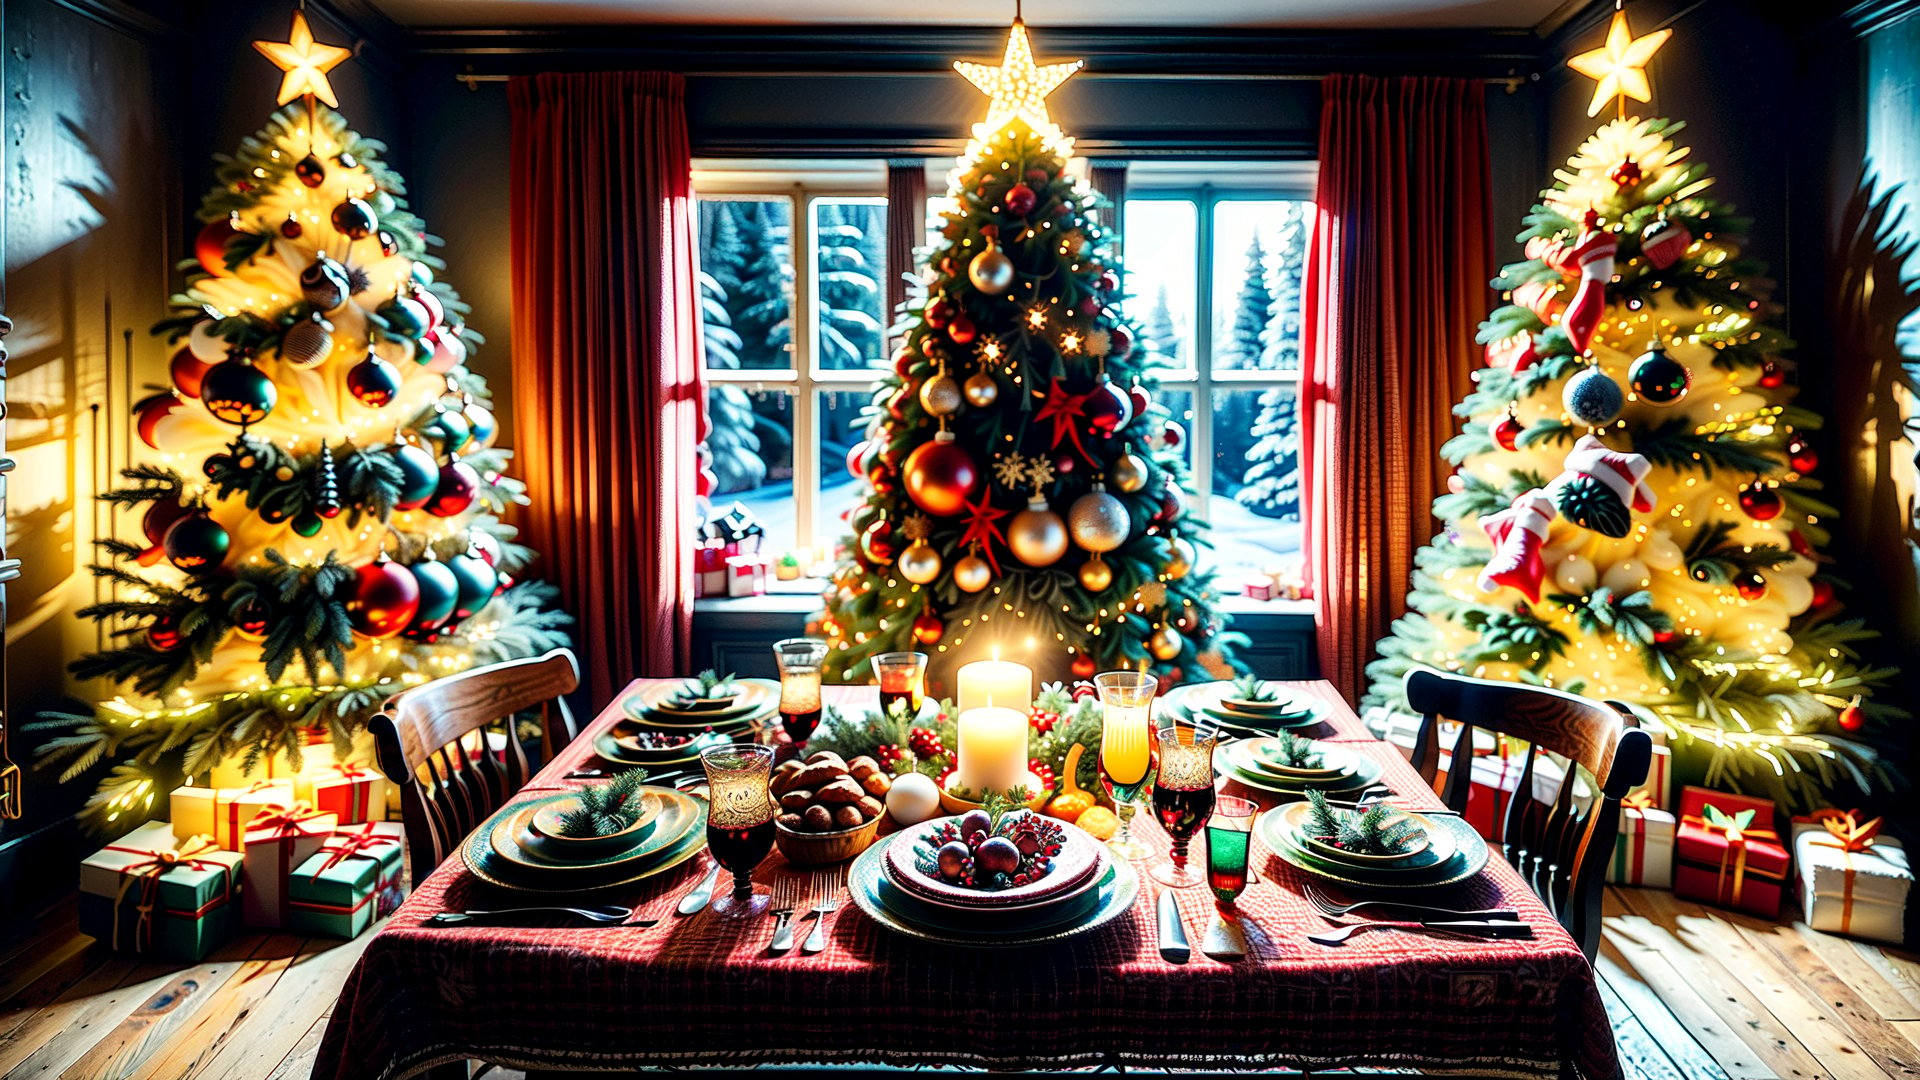 Christmas-themed room, The room is adorned with holiday decorations, creating a warm and inviting atmosphere. The dining table is the centerpiece, covered with a colorful tablecloth and laden with an array of Christmas foods, including a roast, various pies, and seasonal fruits. The highlight on the table is a large, artistically decorated Christmas tree-shaped cake. In the background, a beautifully decorated Christmas tree is illuminated with strings of lights, adding to the festive ambiance. Outside the window, the scene is enchanting with unique snowflake patterns gently falling, creating a picturesque winter wonderland. The overall scene encapsulates the joy and warmth of the Christmas season.,Santa Claus